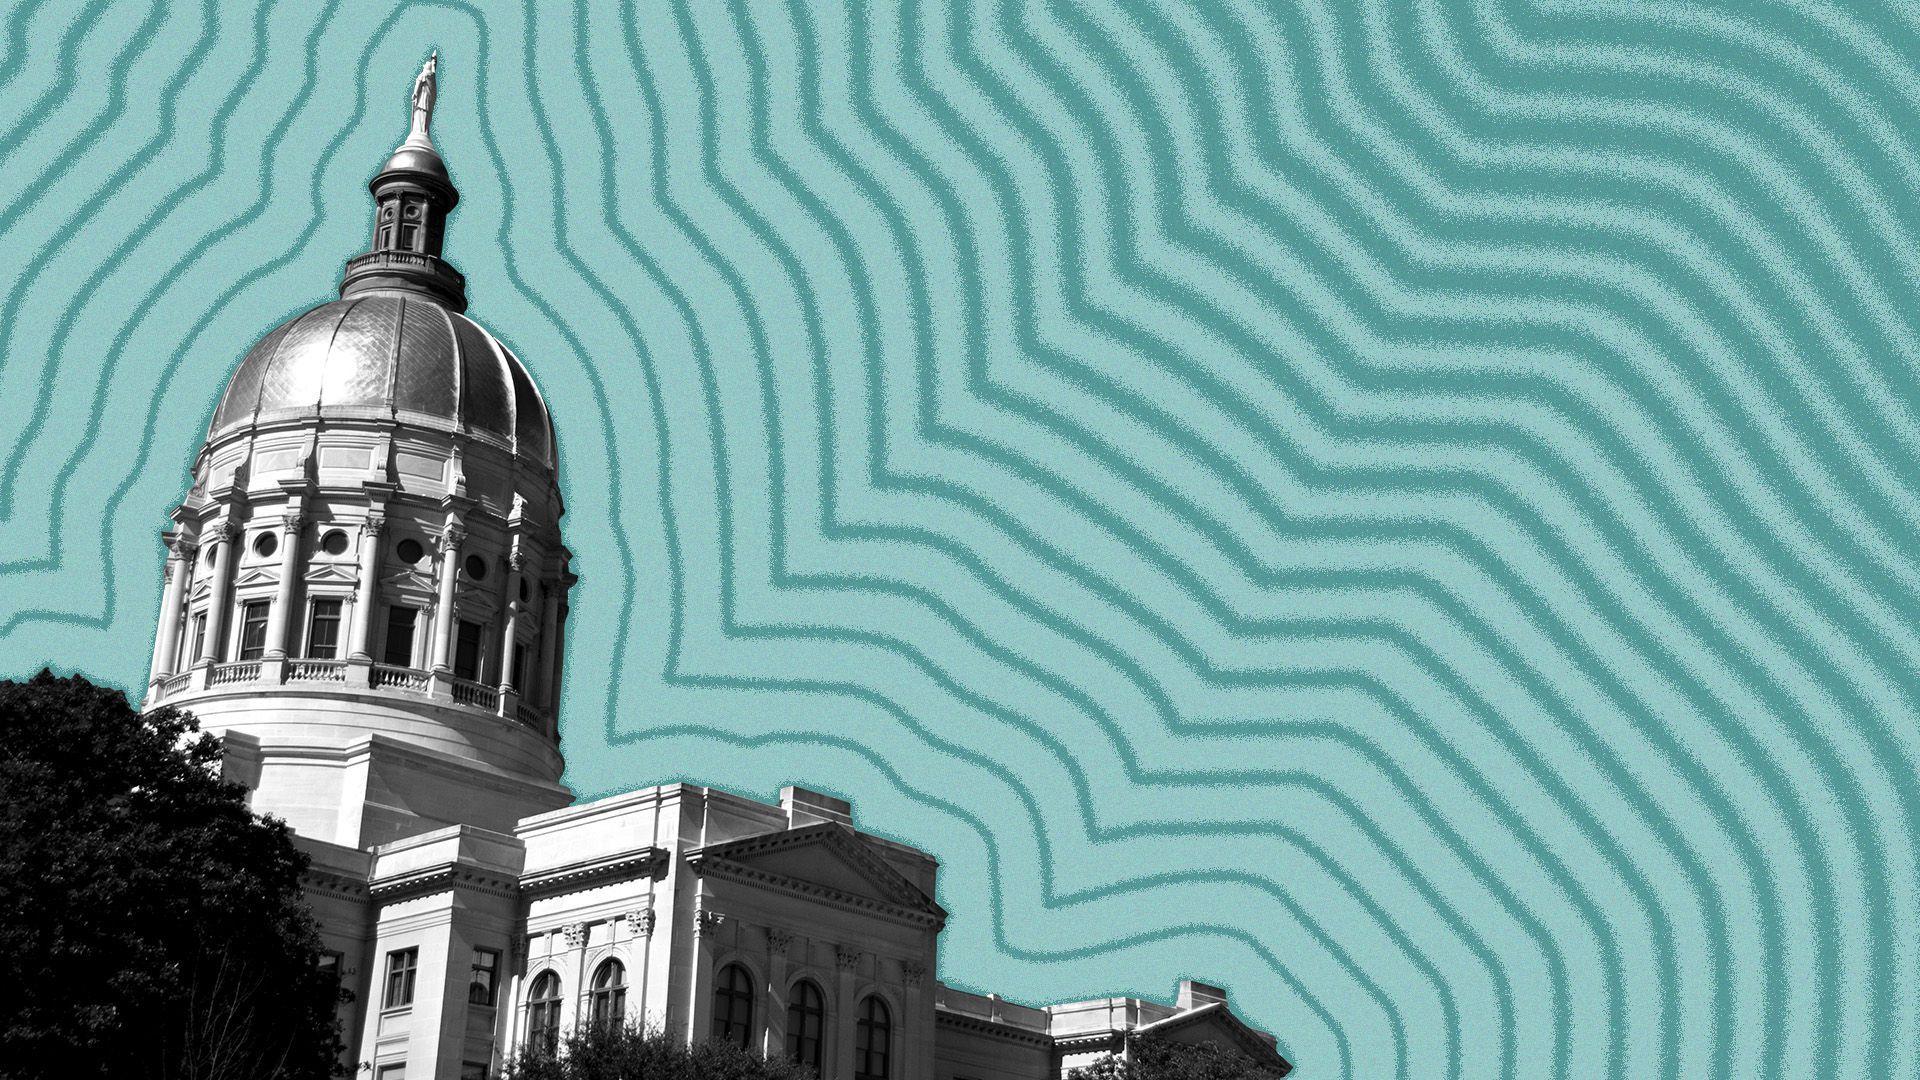 Illustration of the Georgia State Capitol with lines radiating from it.